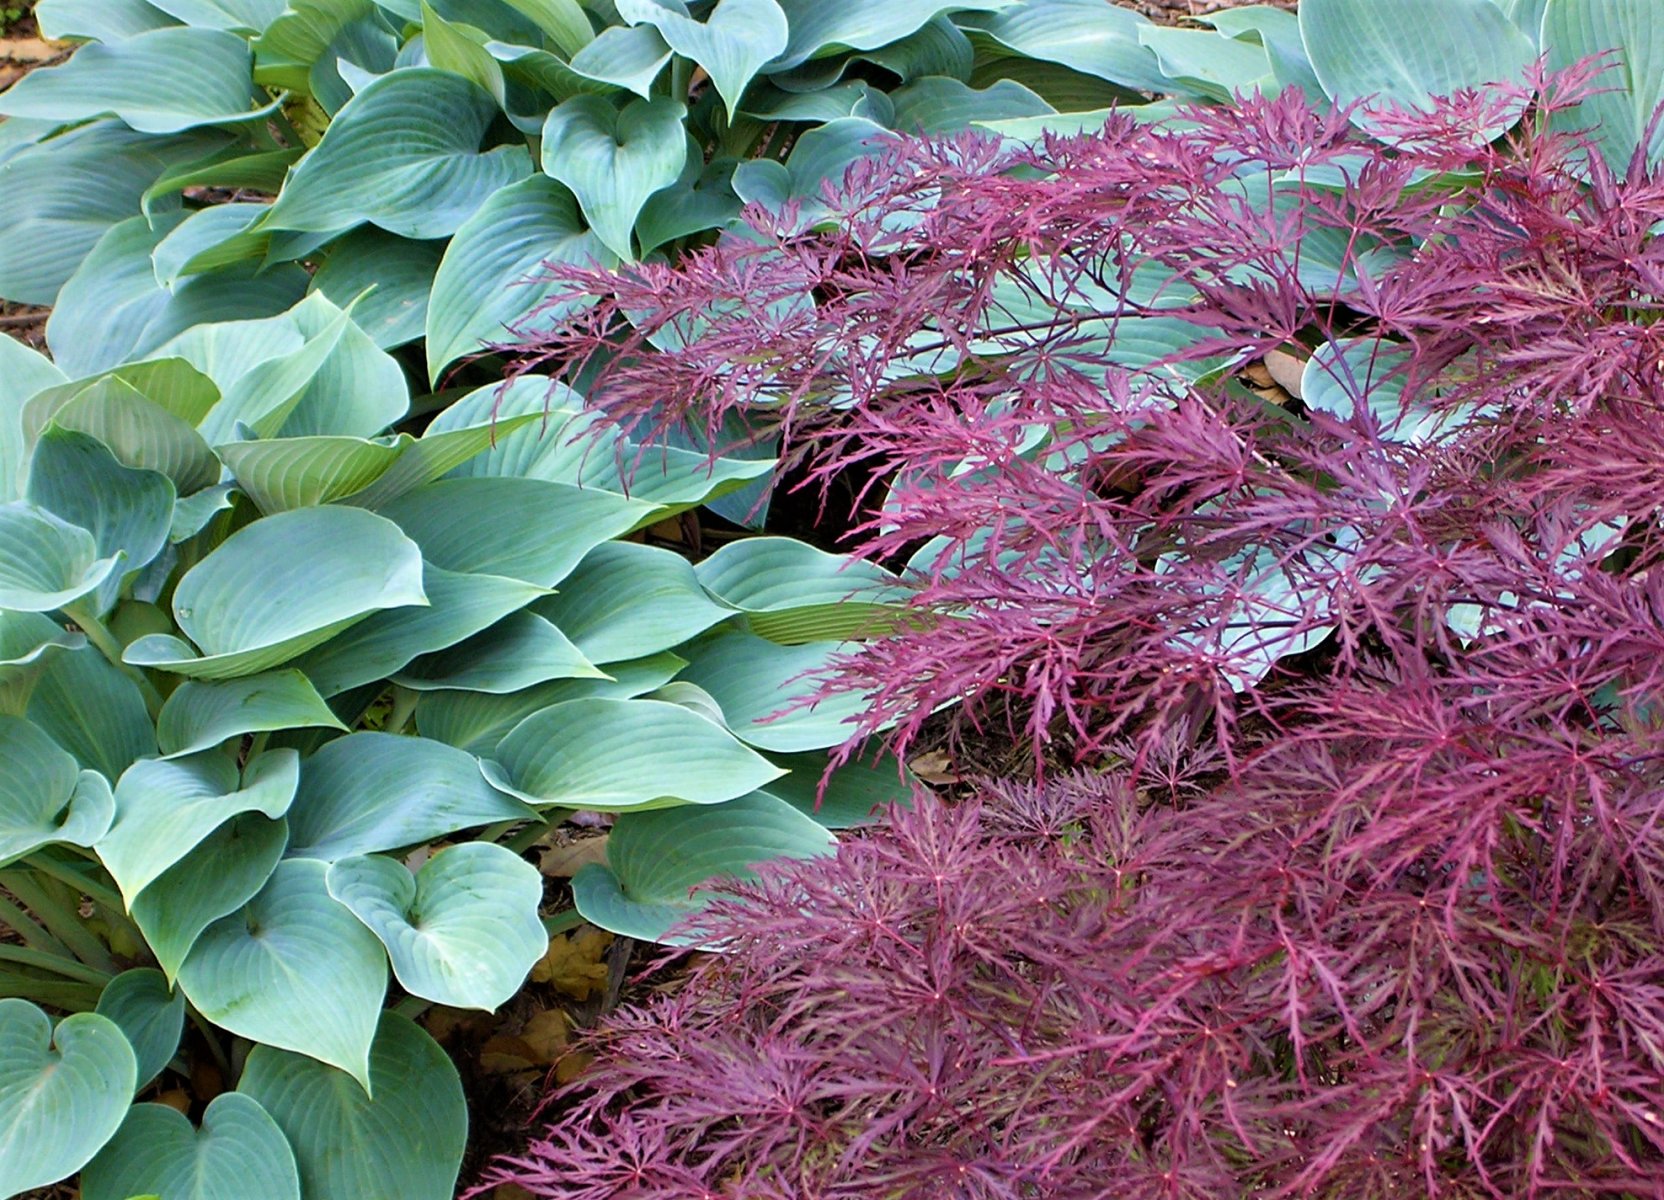 Textural contrast and foliage color are integrated in the design process. : Plant Palette : Richmond VA Landscape Designer: Gardens by Monit, LLC: Monit Rosendale landscape designer Richmond and Charlottesville Virginia and Fredericksburg Virginia and Williamsburg Virginia